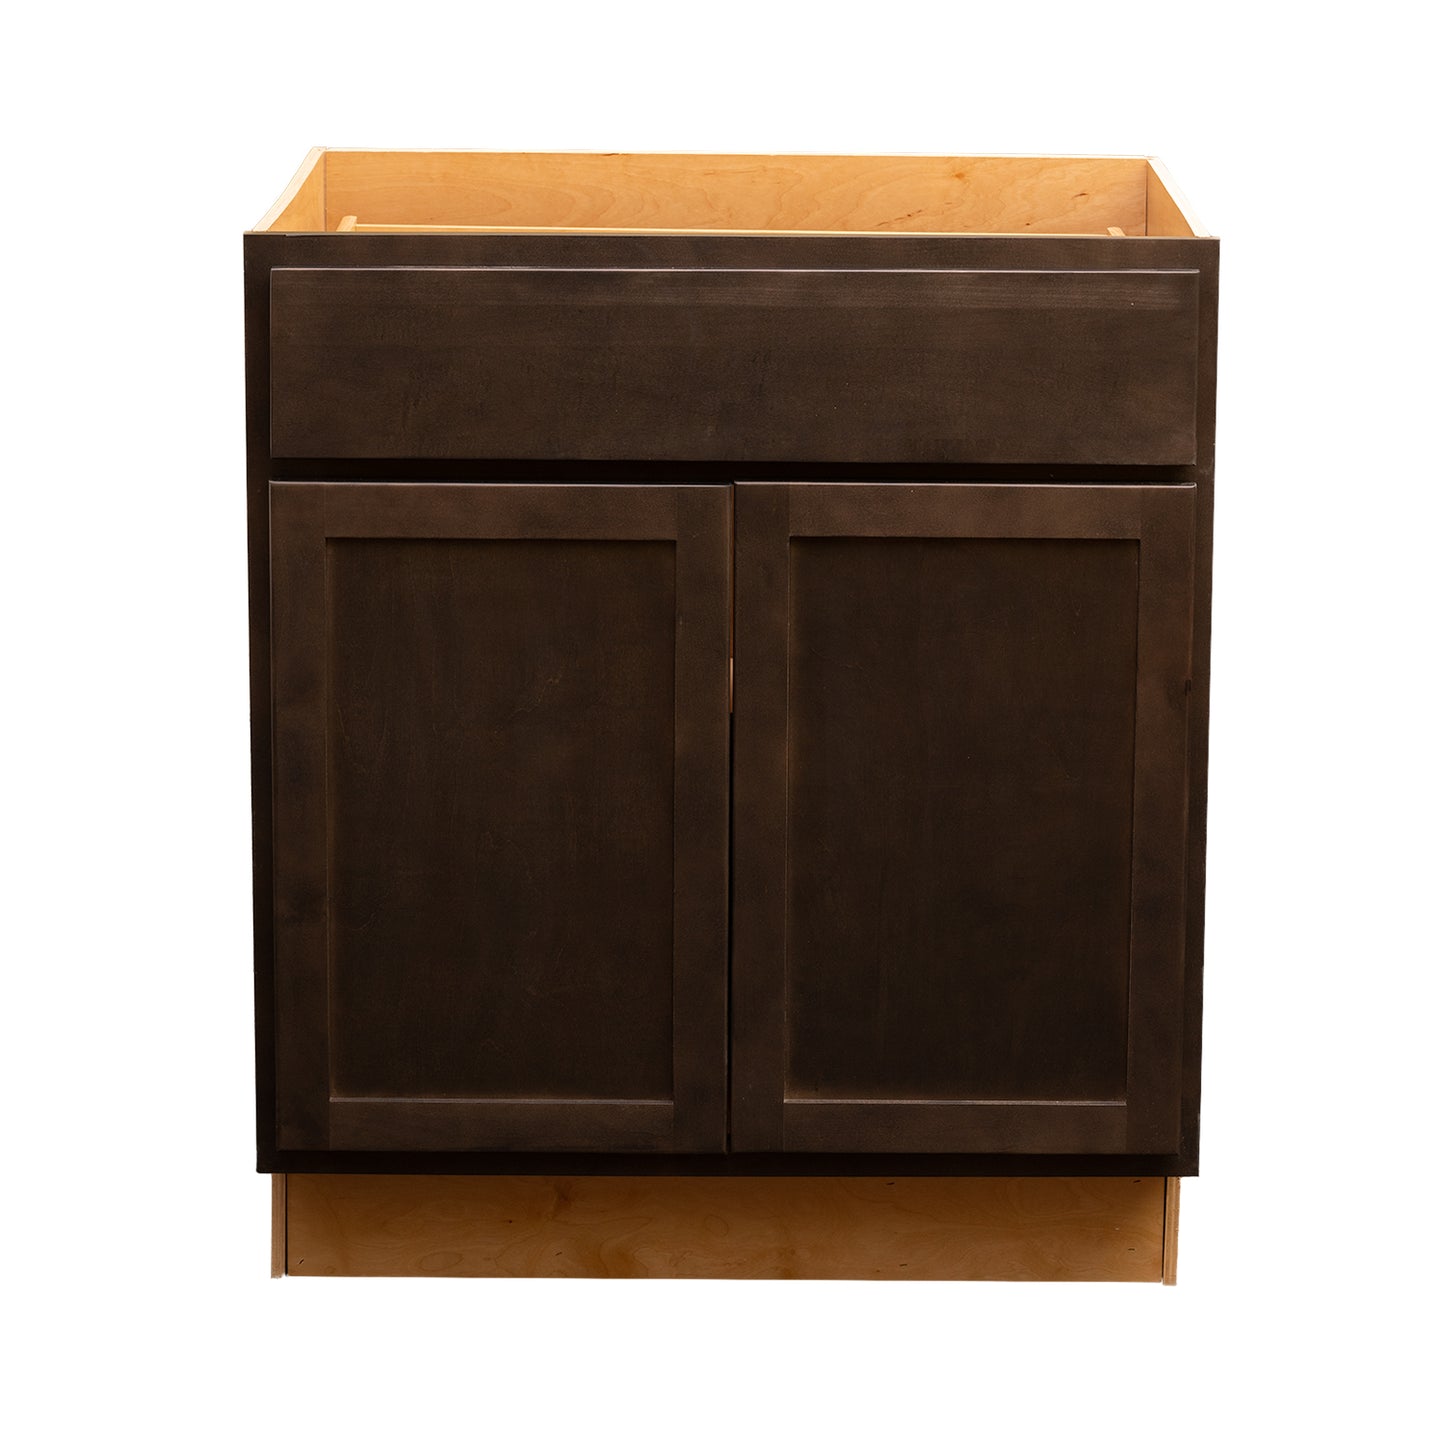 Quicklock RTA (Ready-to-Assemble) Espresso Stain Base Cabinet- Large